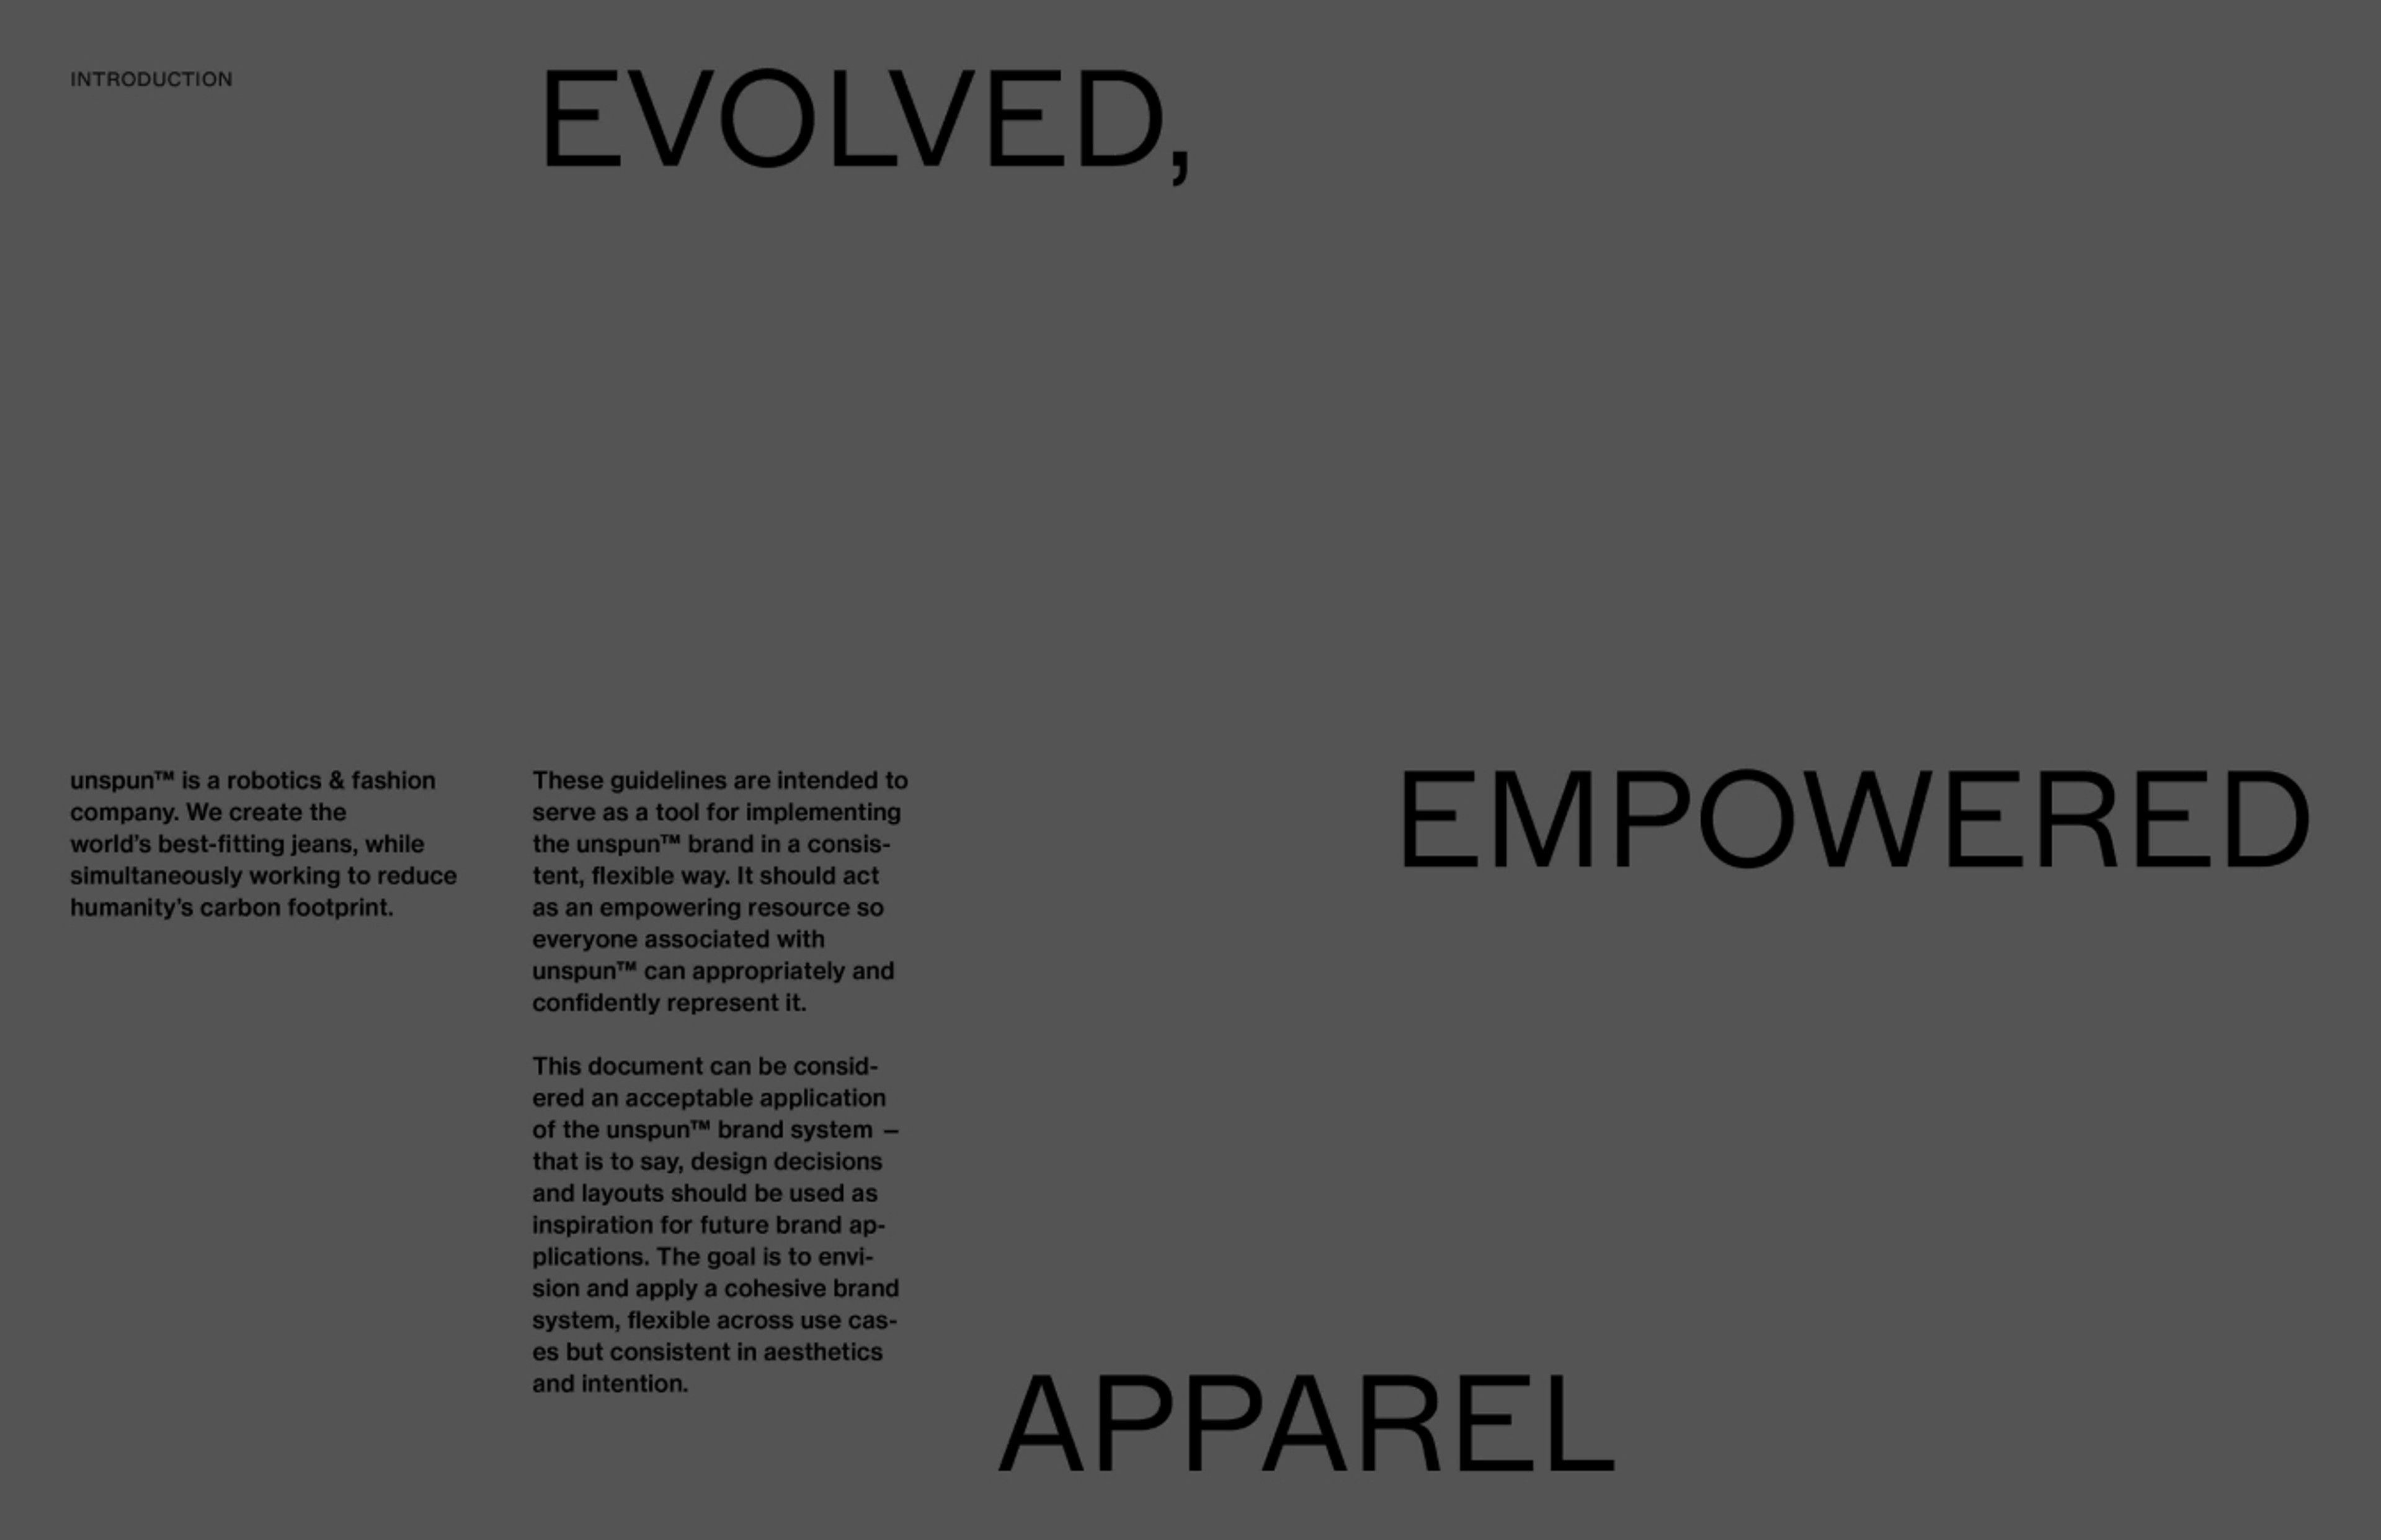 unspun brand guidelines that read "evolved, empowered apparel"